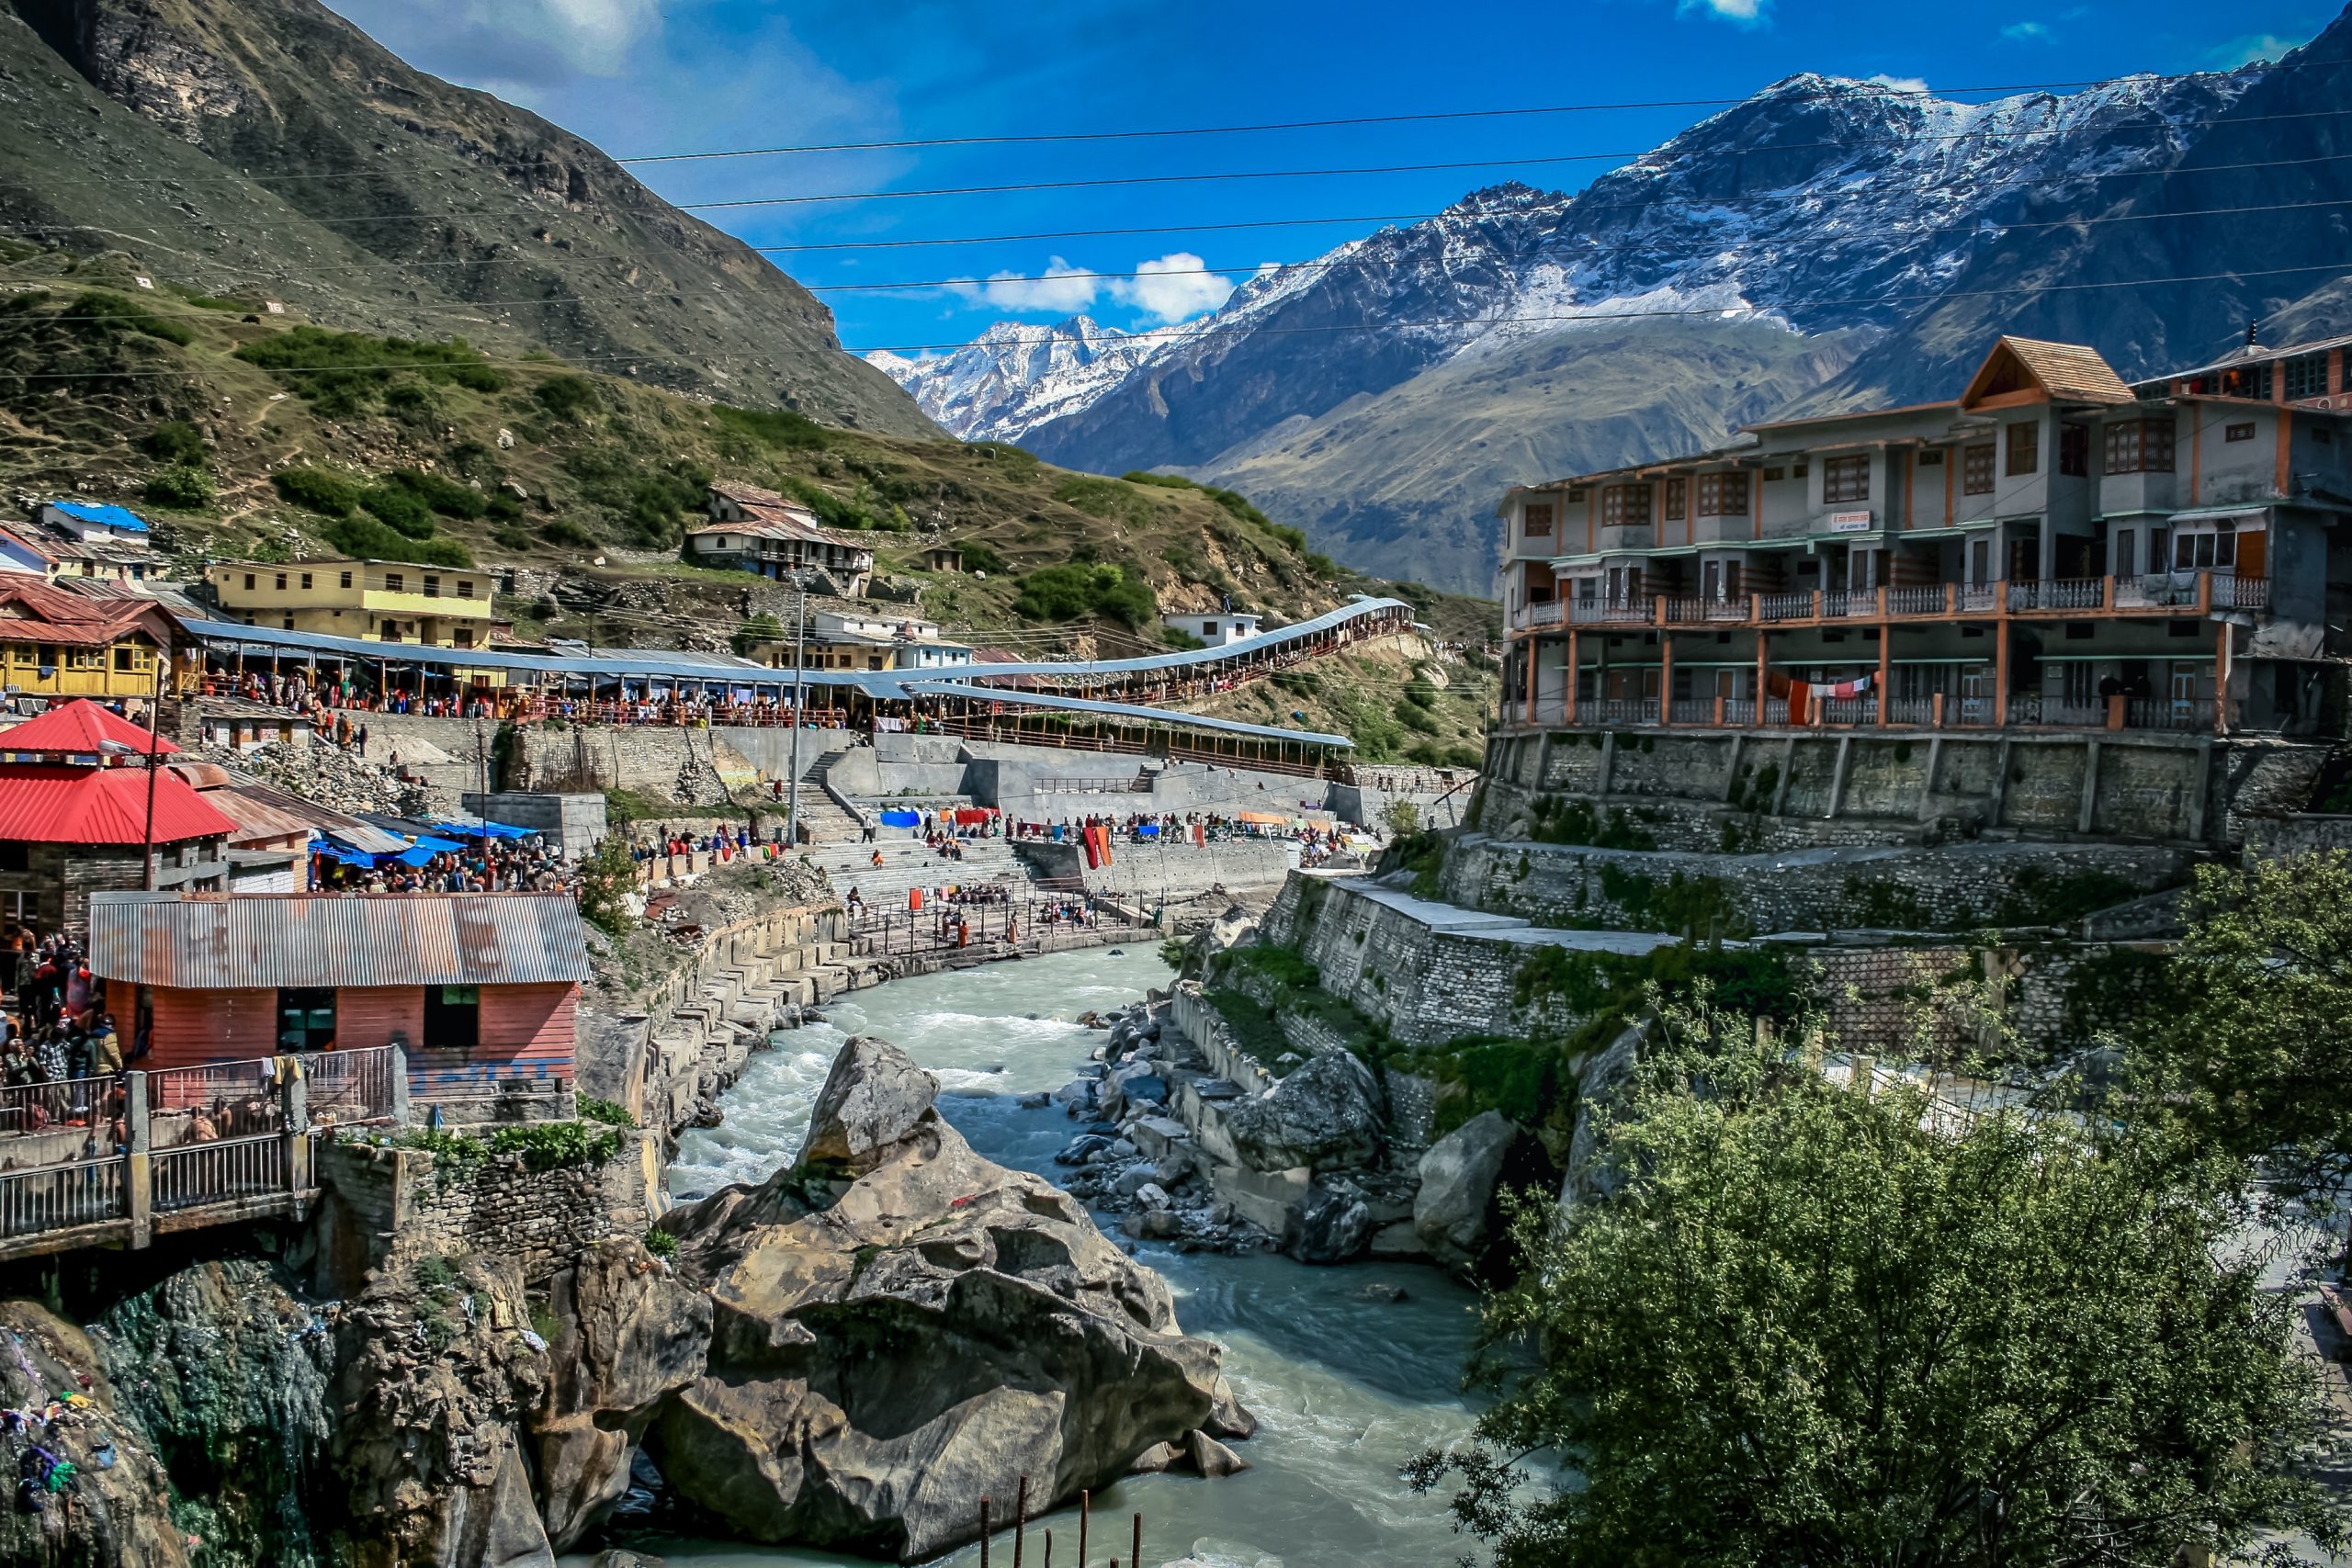 Overnight stay in the winter seat of Lord Badrinath - Joshimath